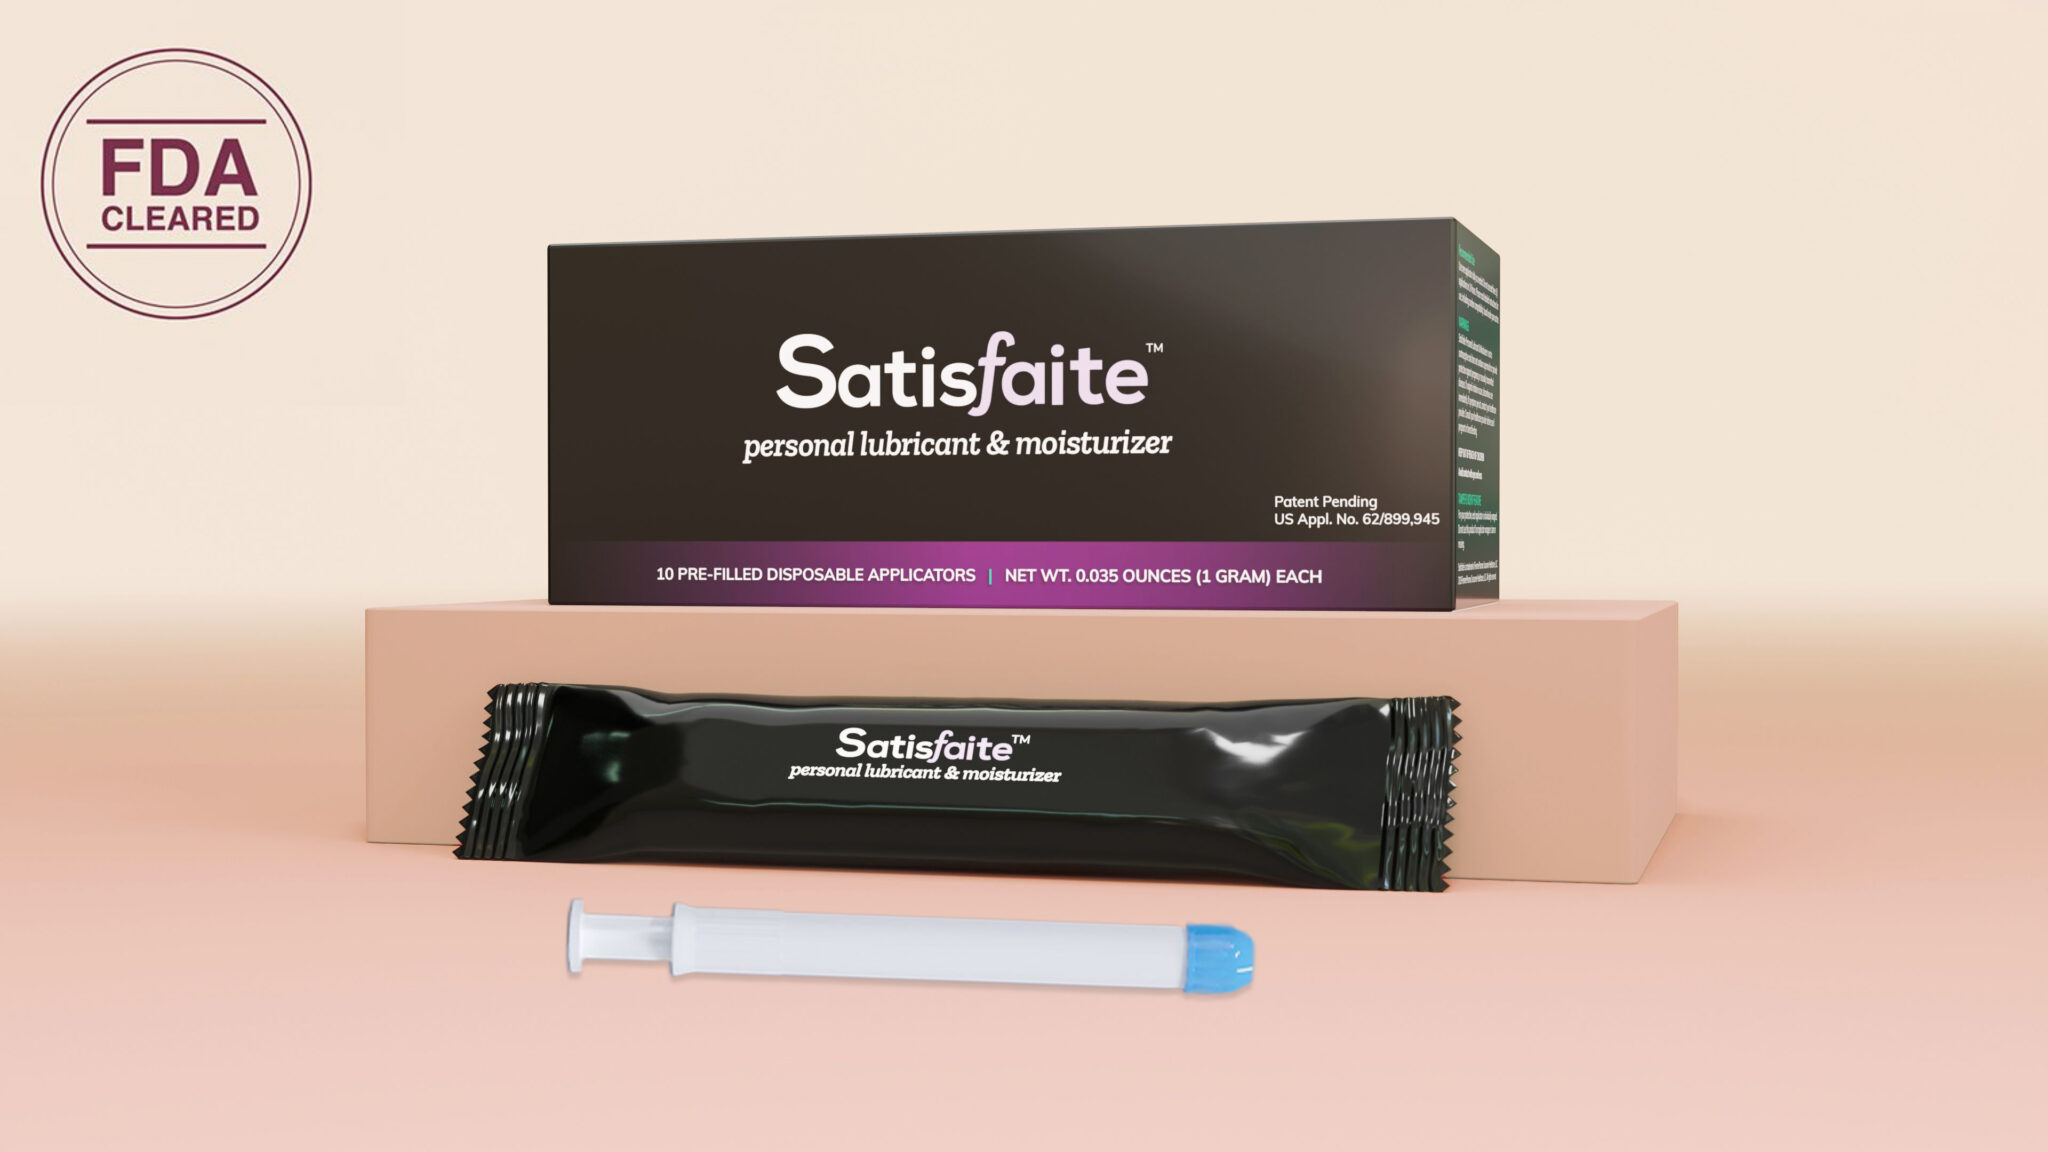 Satisfaite is a great personal moisturizer